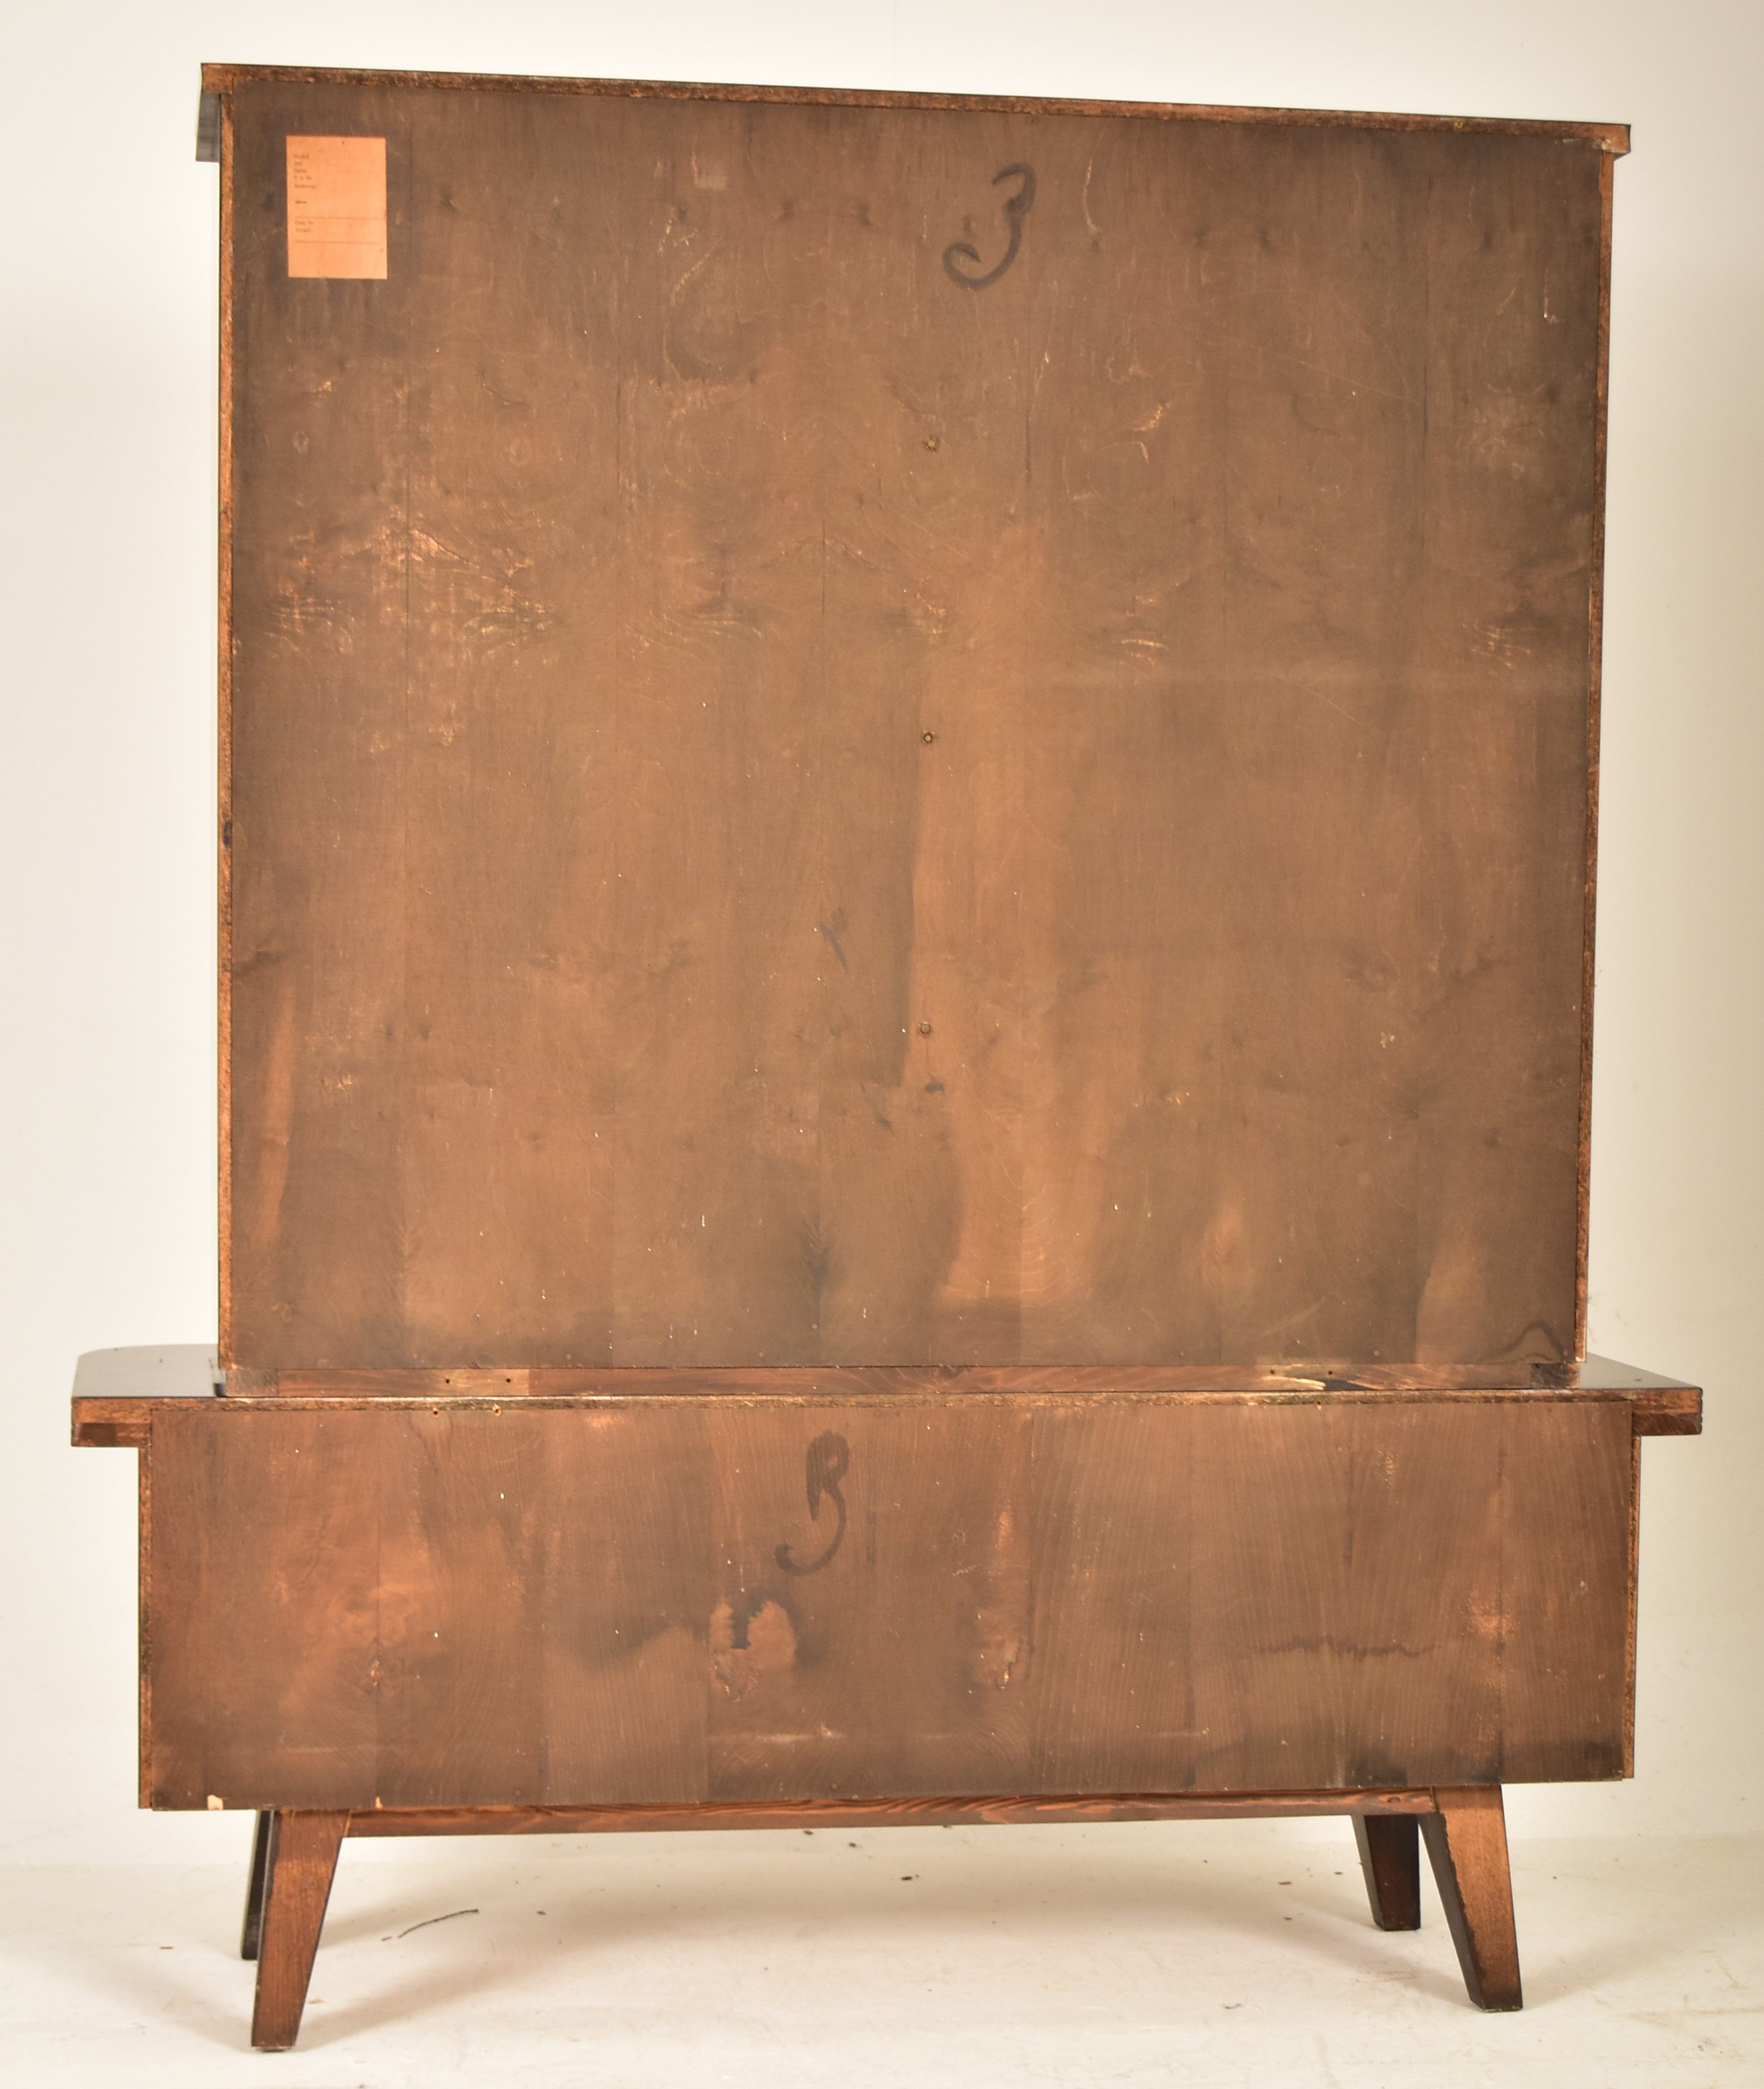 MID 20TH CENTURY GERMAN DESIGNER CABINET ON STAND - Image 7 of 8